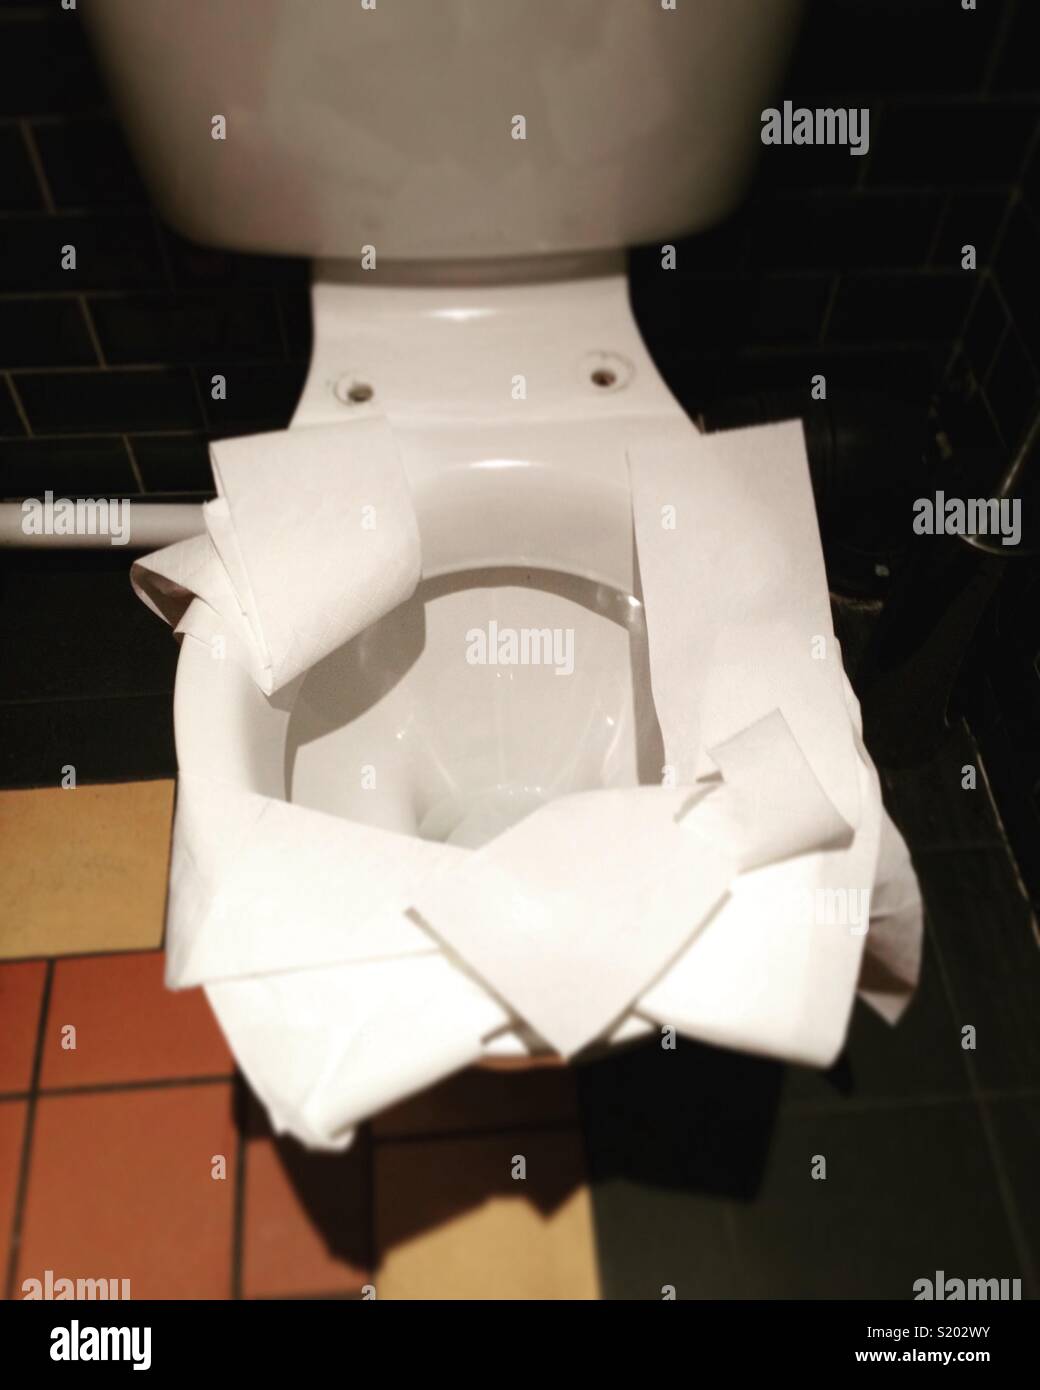 Toilet without a seat but with a paper covering all around the rim, apparently placed by someone who is worried about hygiene, dirt & germs. Stock Photo